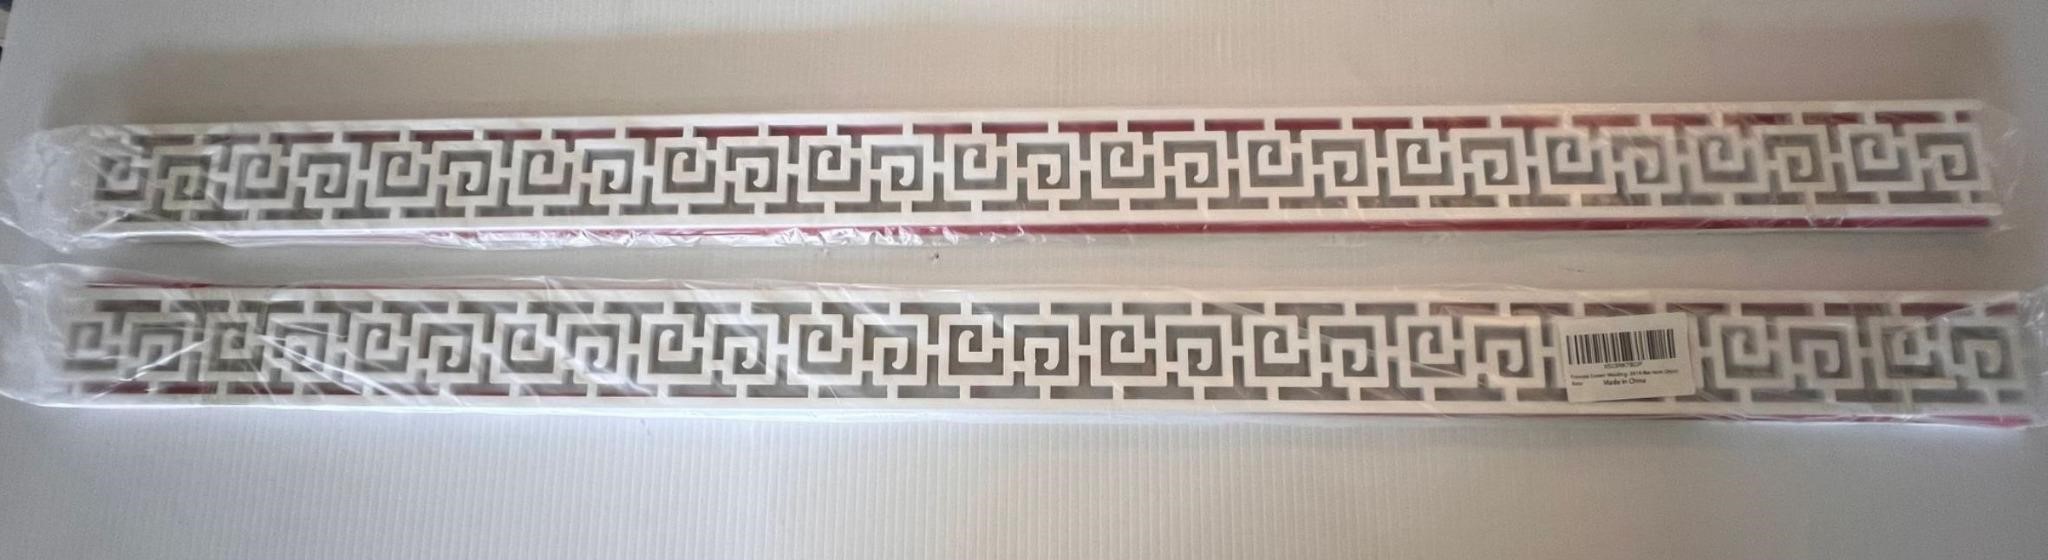 crown moldings, 98x6 cm, 2 pack, 4 pieces - NEW